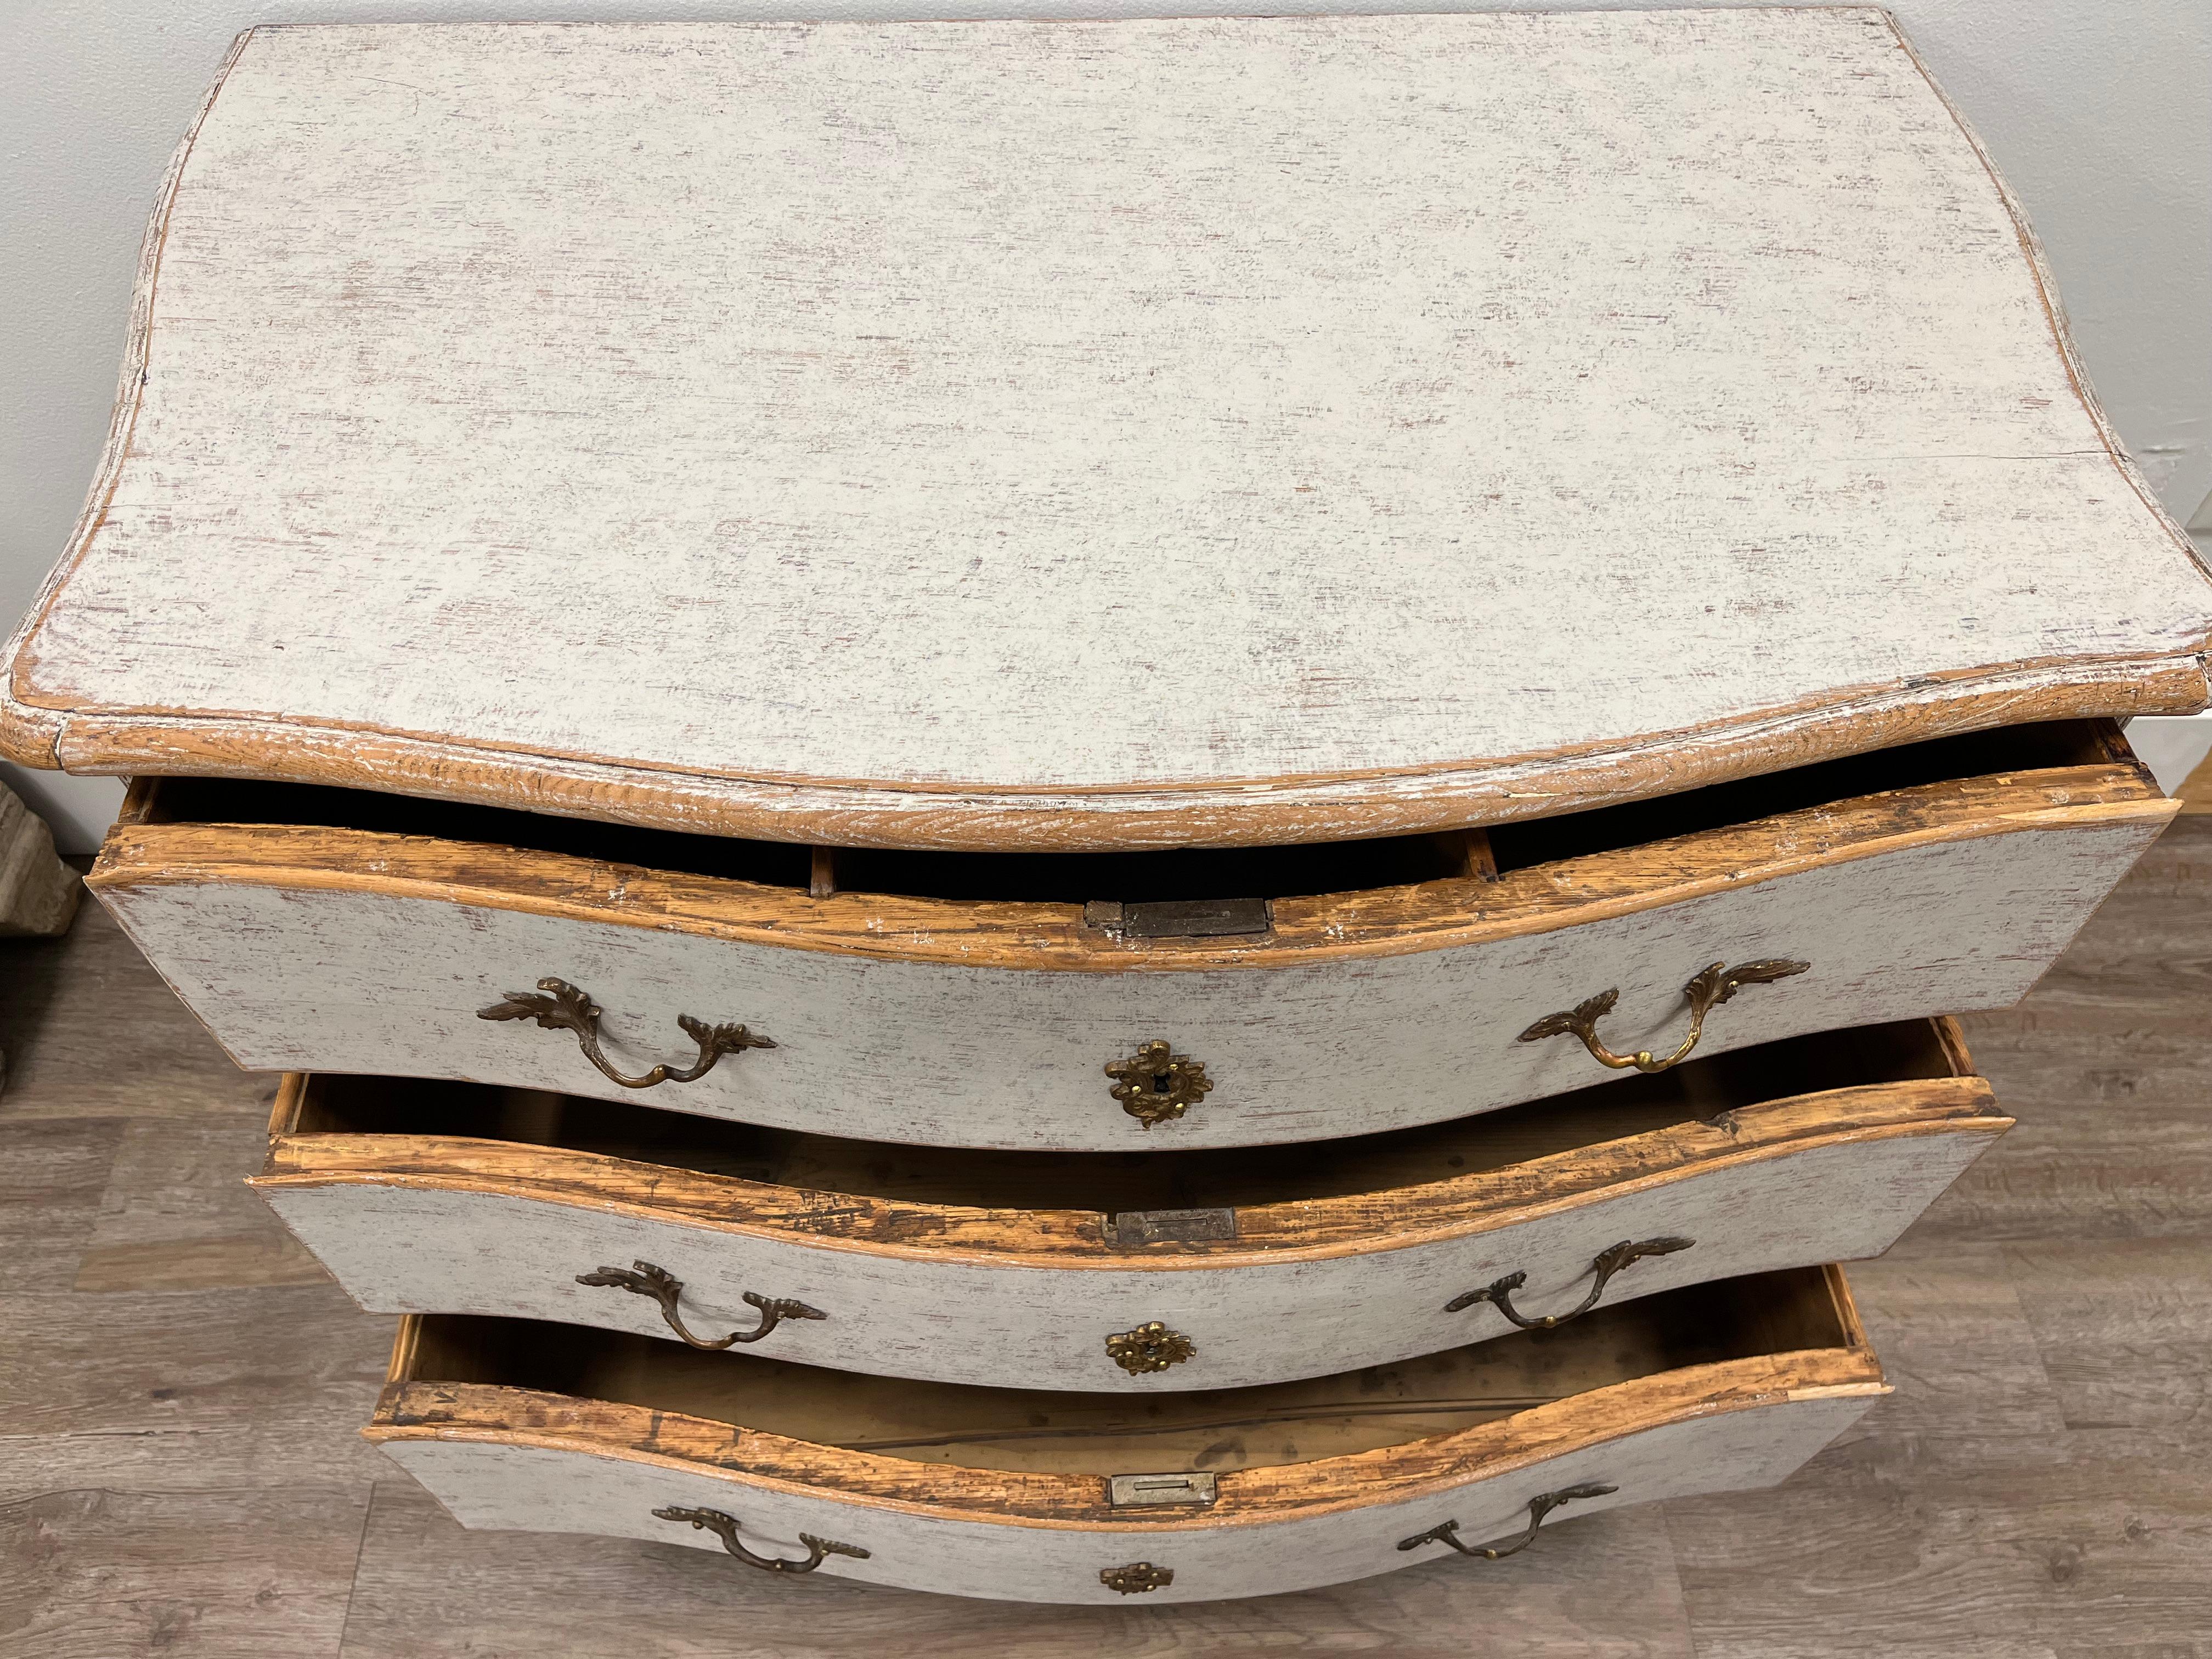 A Rococo commode with original brass pulls, hardware and locks on three bow front drawers. The top drawer has three compartments. Commode top front and sides are contoured. Apron and feet are shaped. Tastefully repainted in light grey.